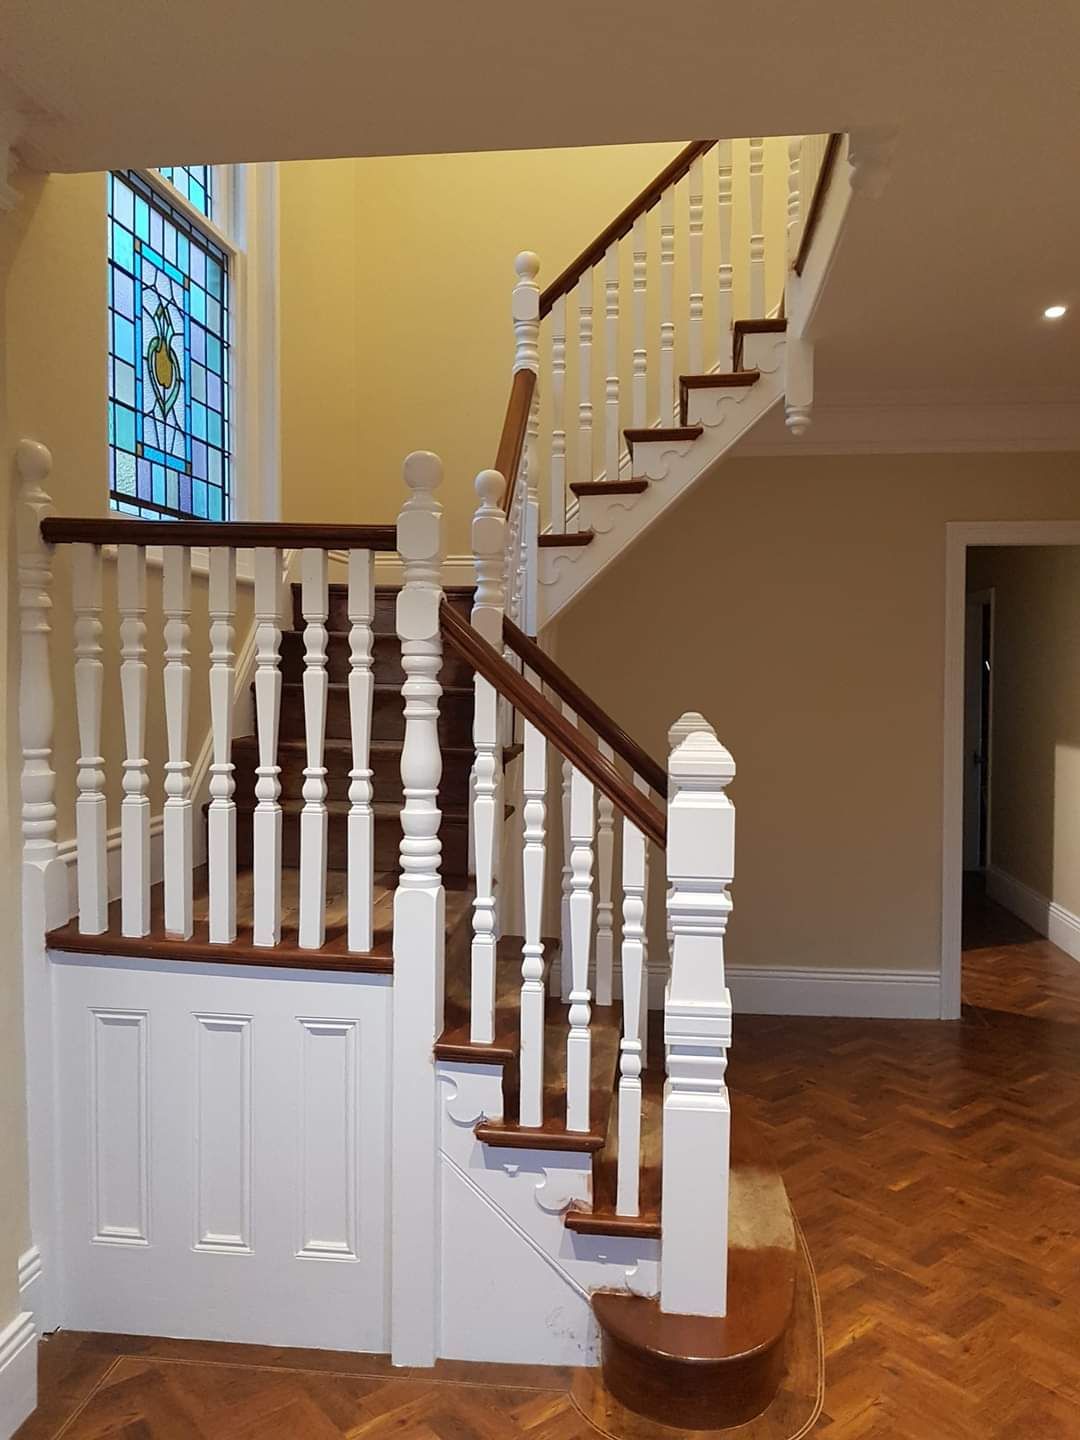 Wooden staircase with fabric floor & landings